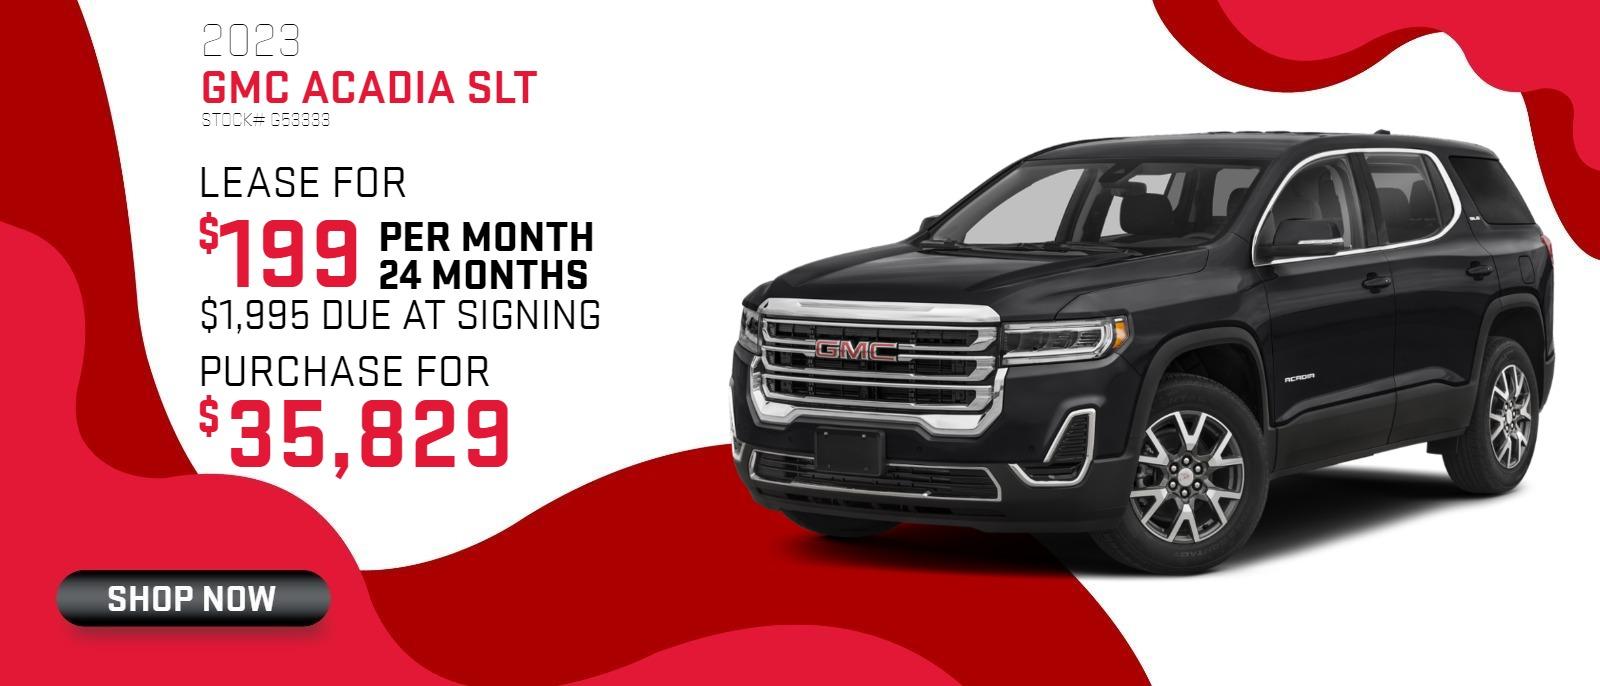 2023 Acadia SLT
Stock# G53333
Lease for $199 per month, 24 months, $1995 down
Purchase for $35,829